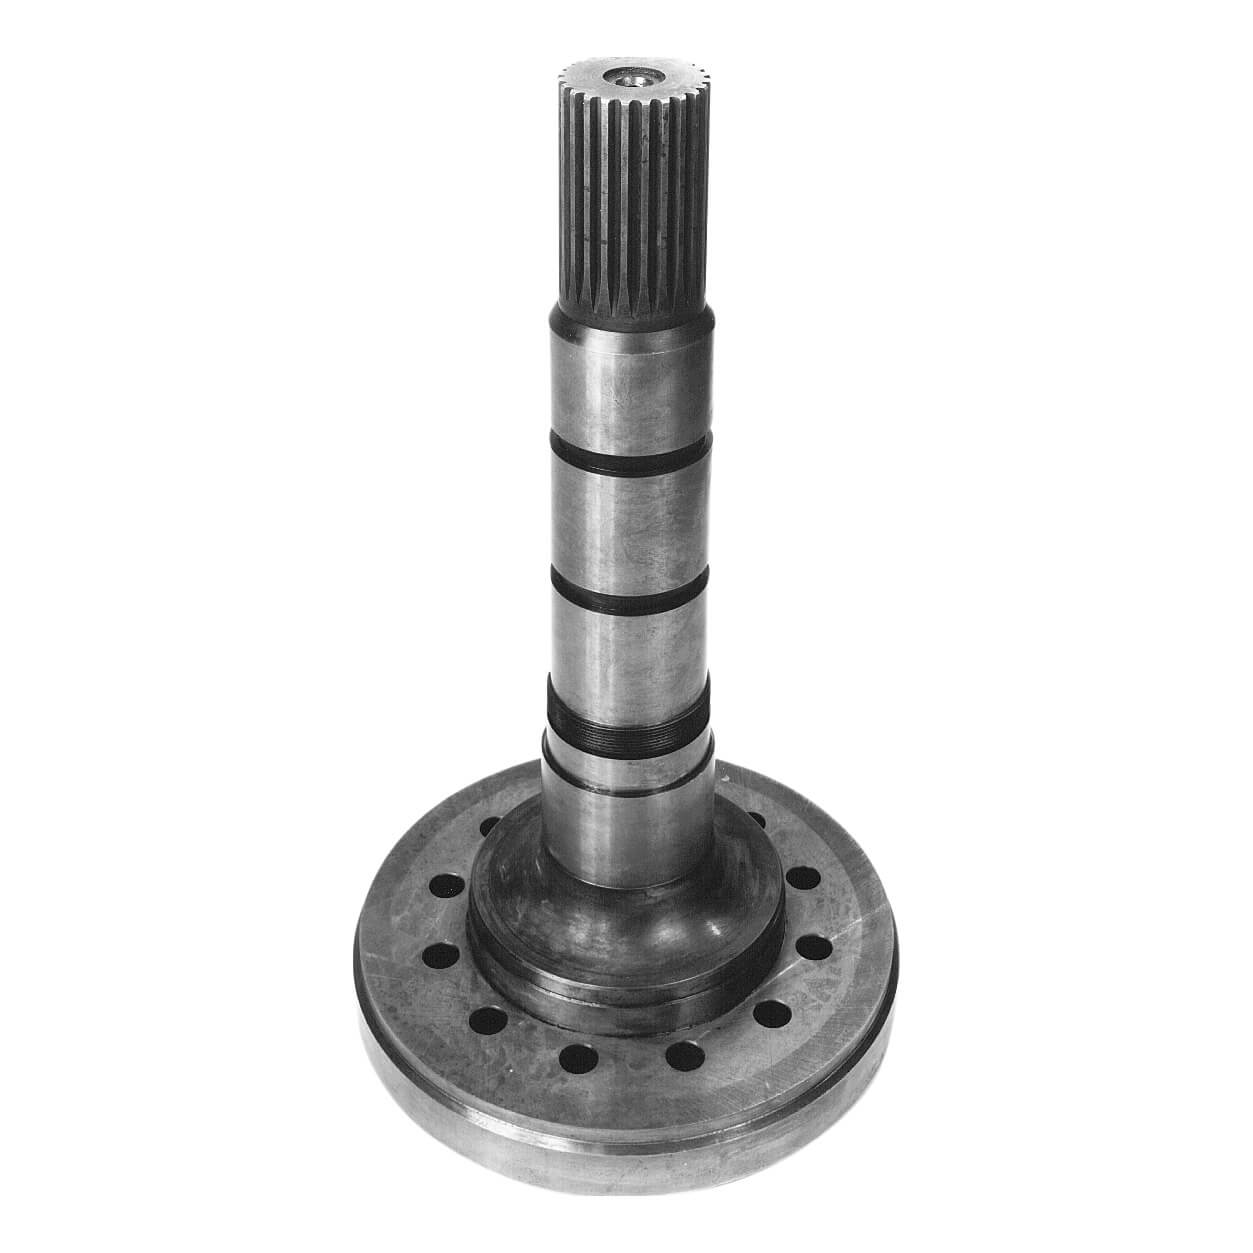 Welded machine tool spindle blank - as machined